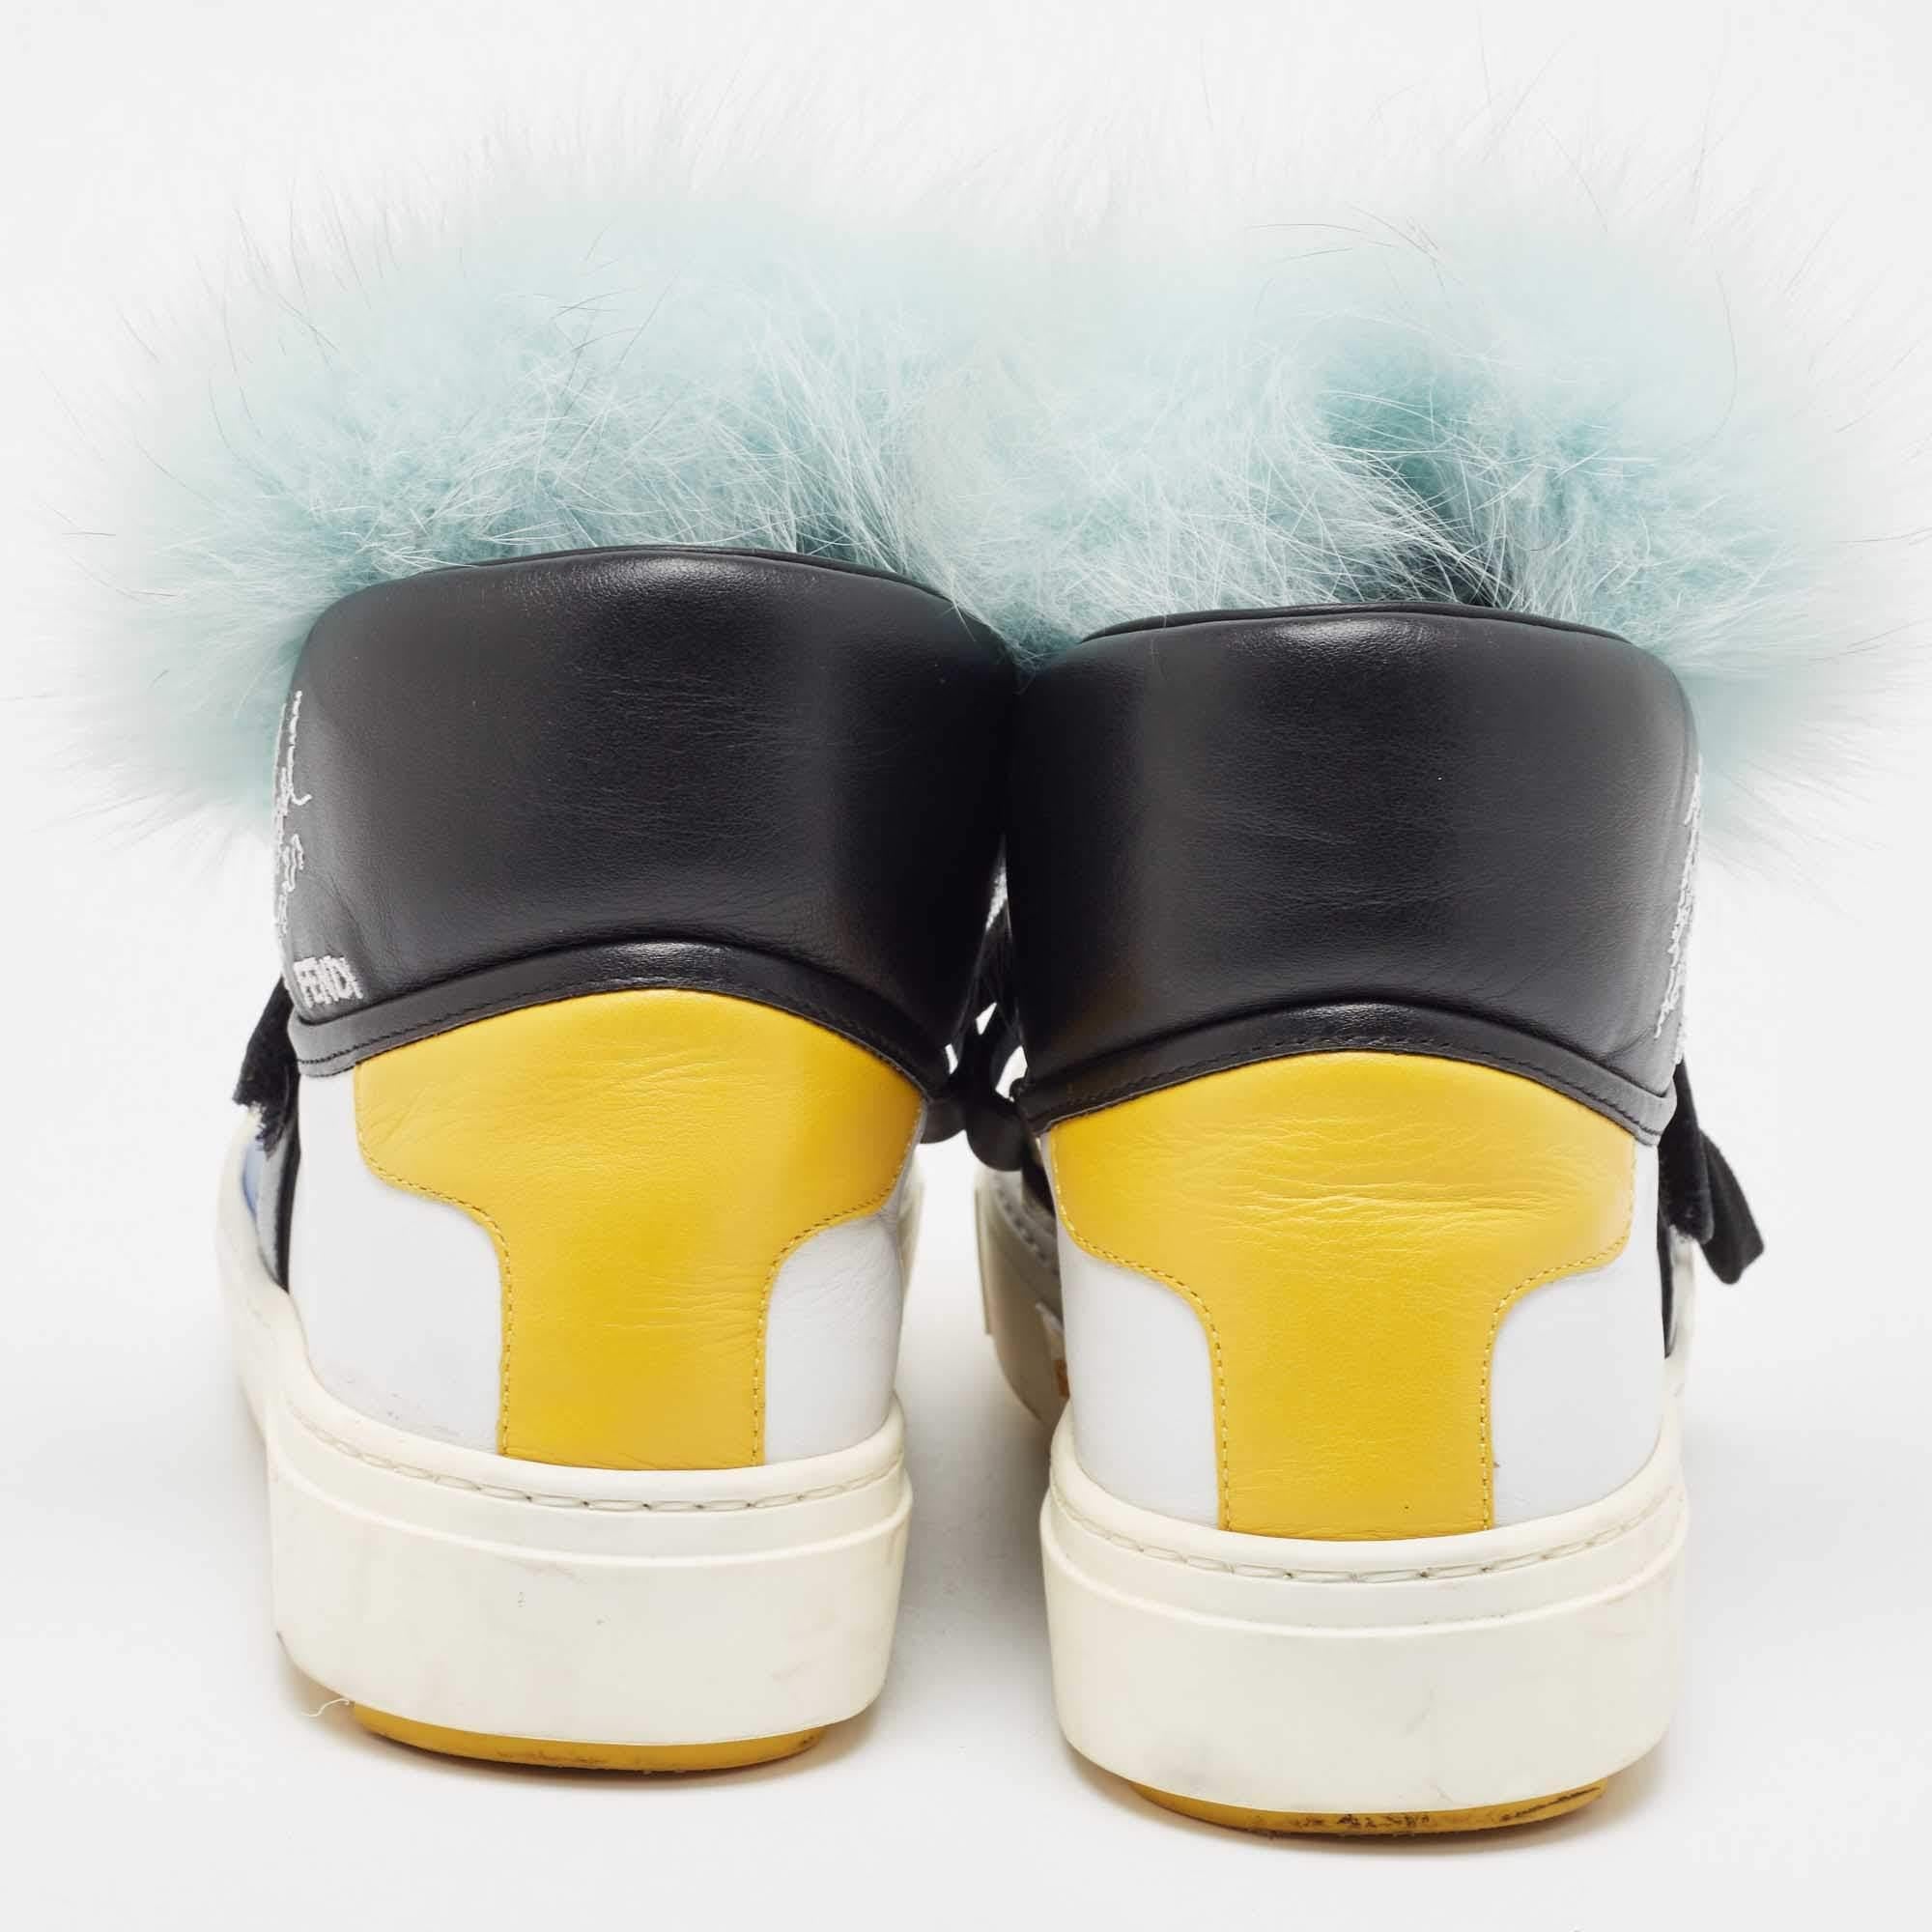 Fendi Multicolor Fur And Leather Karlito Hight Top Sneakers Size 38.5 1